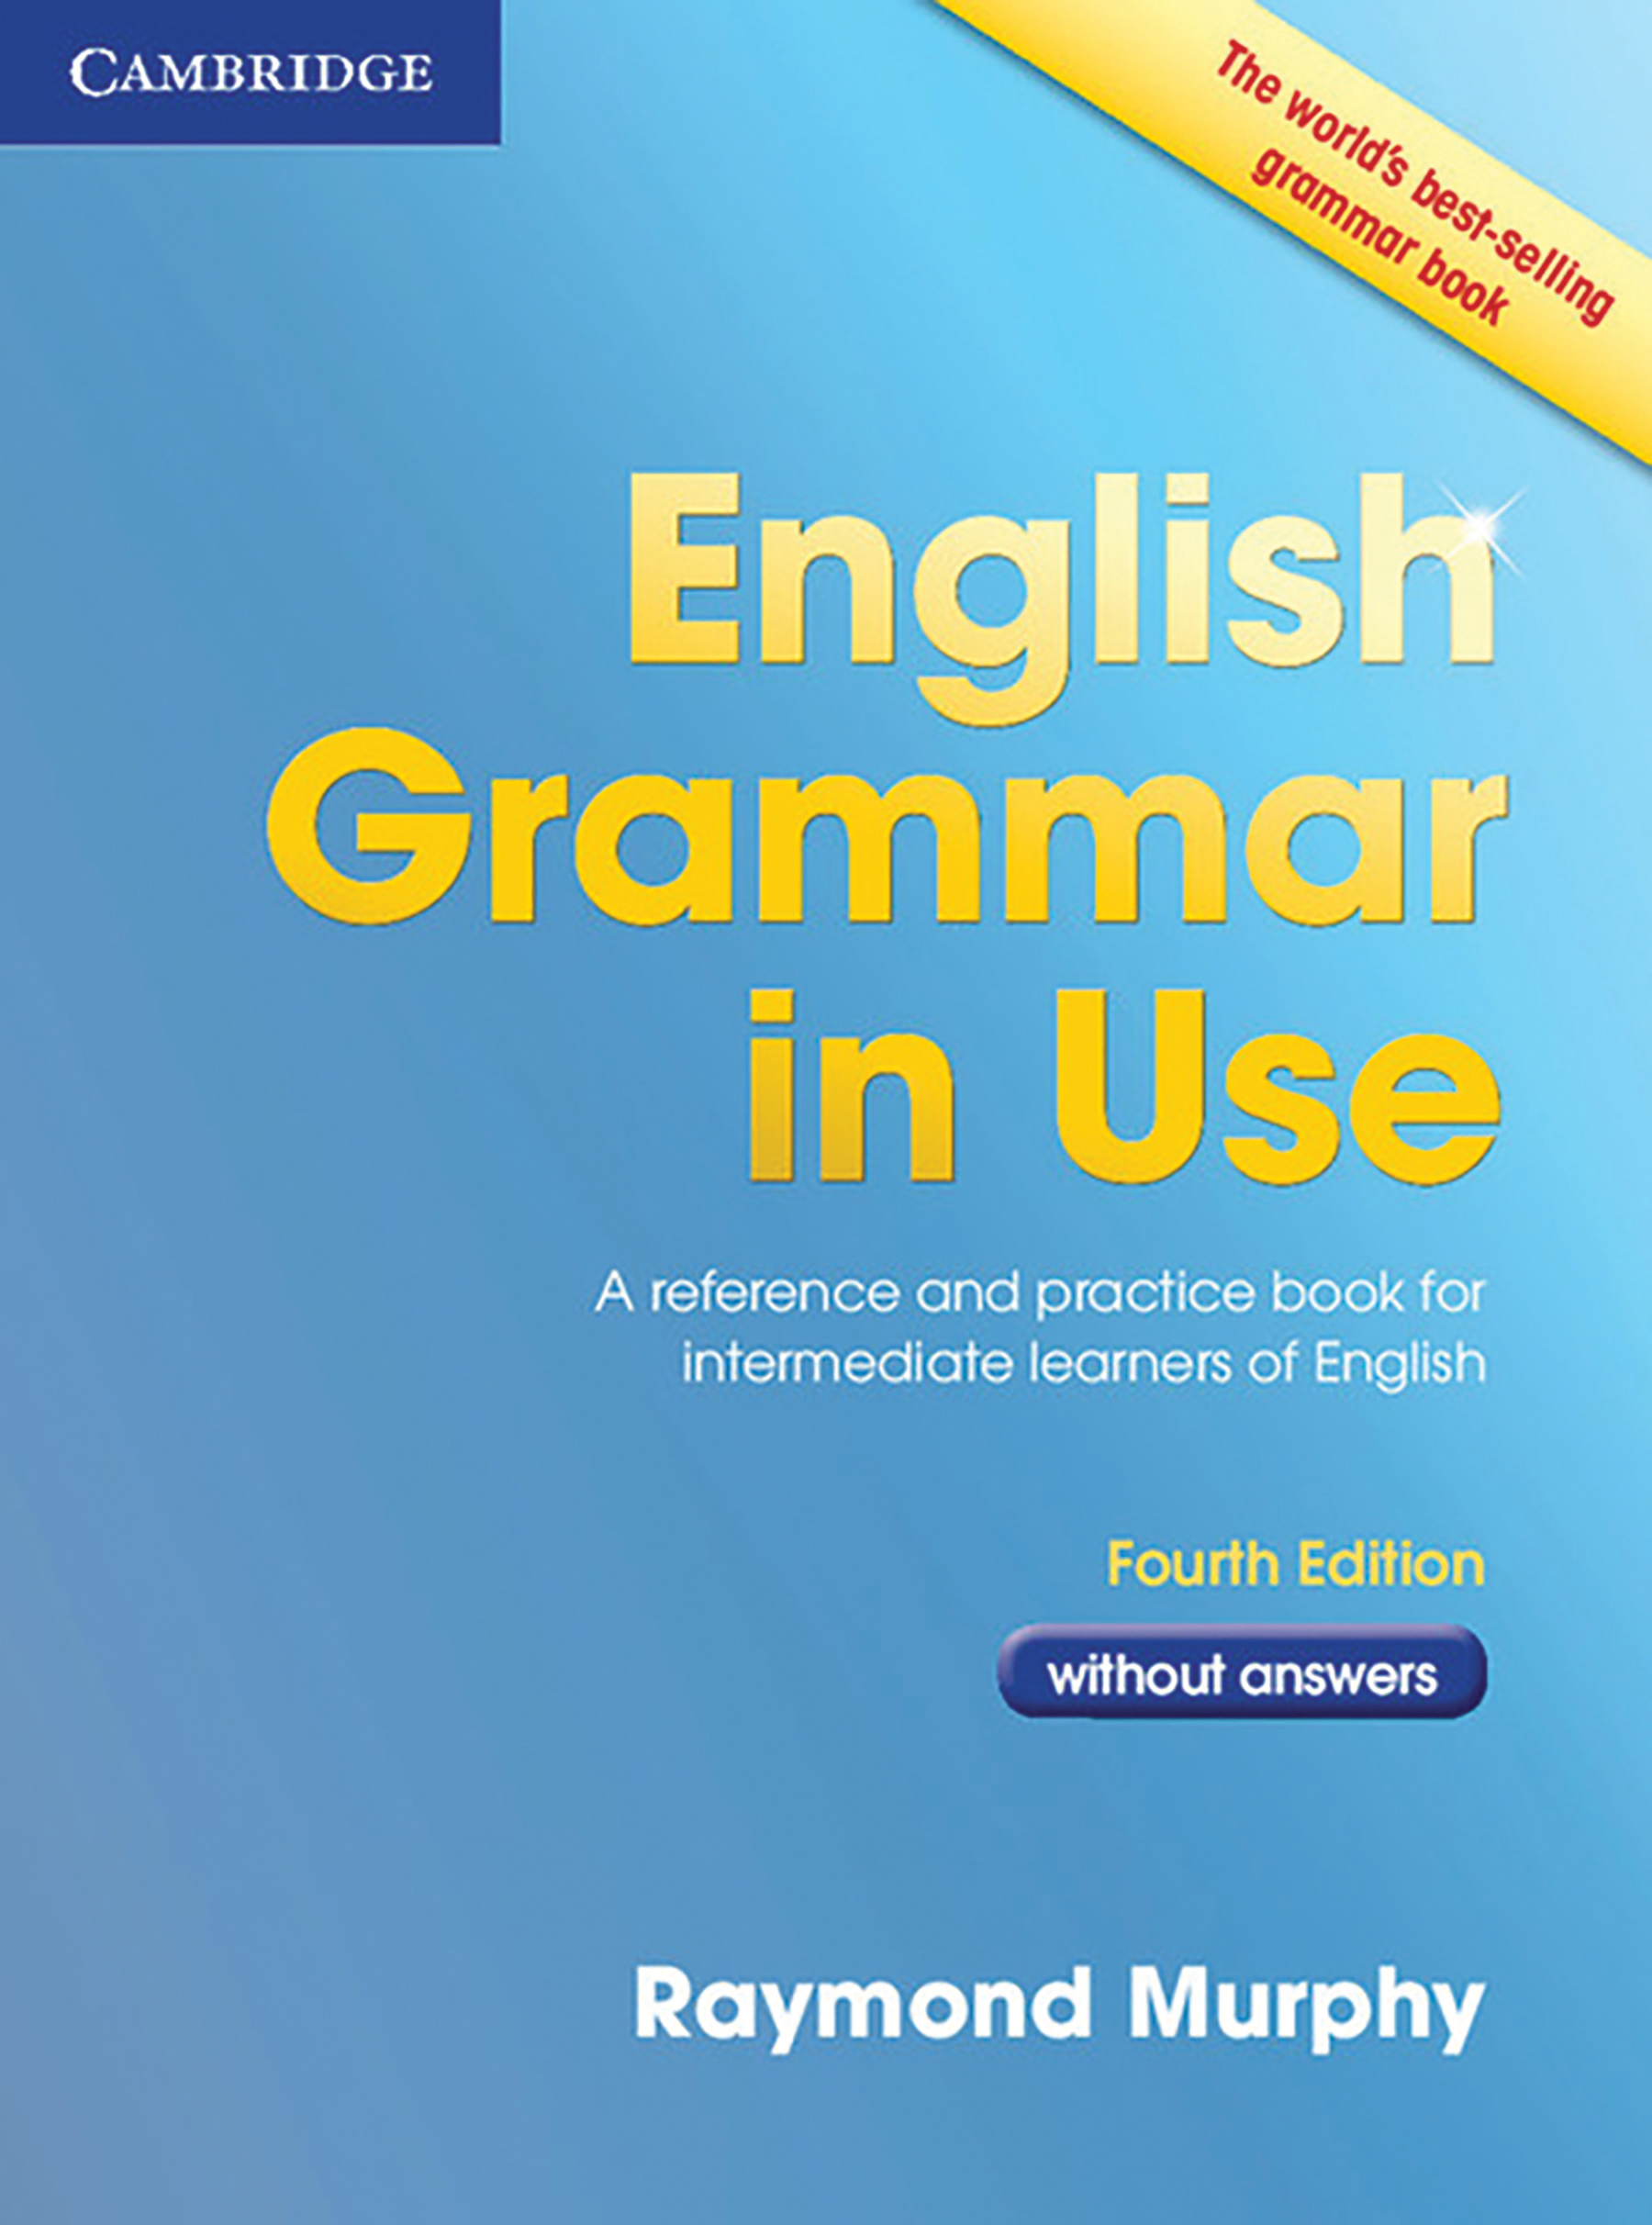 Raymond Murphy English Grammar in Use (Fourth Edition) Book without answers 